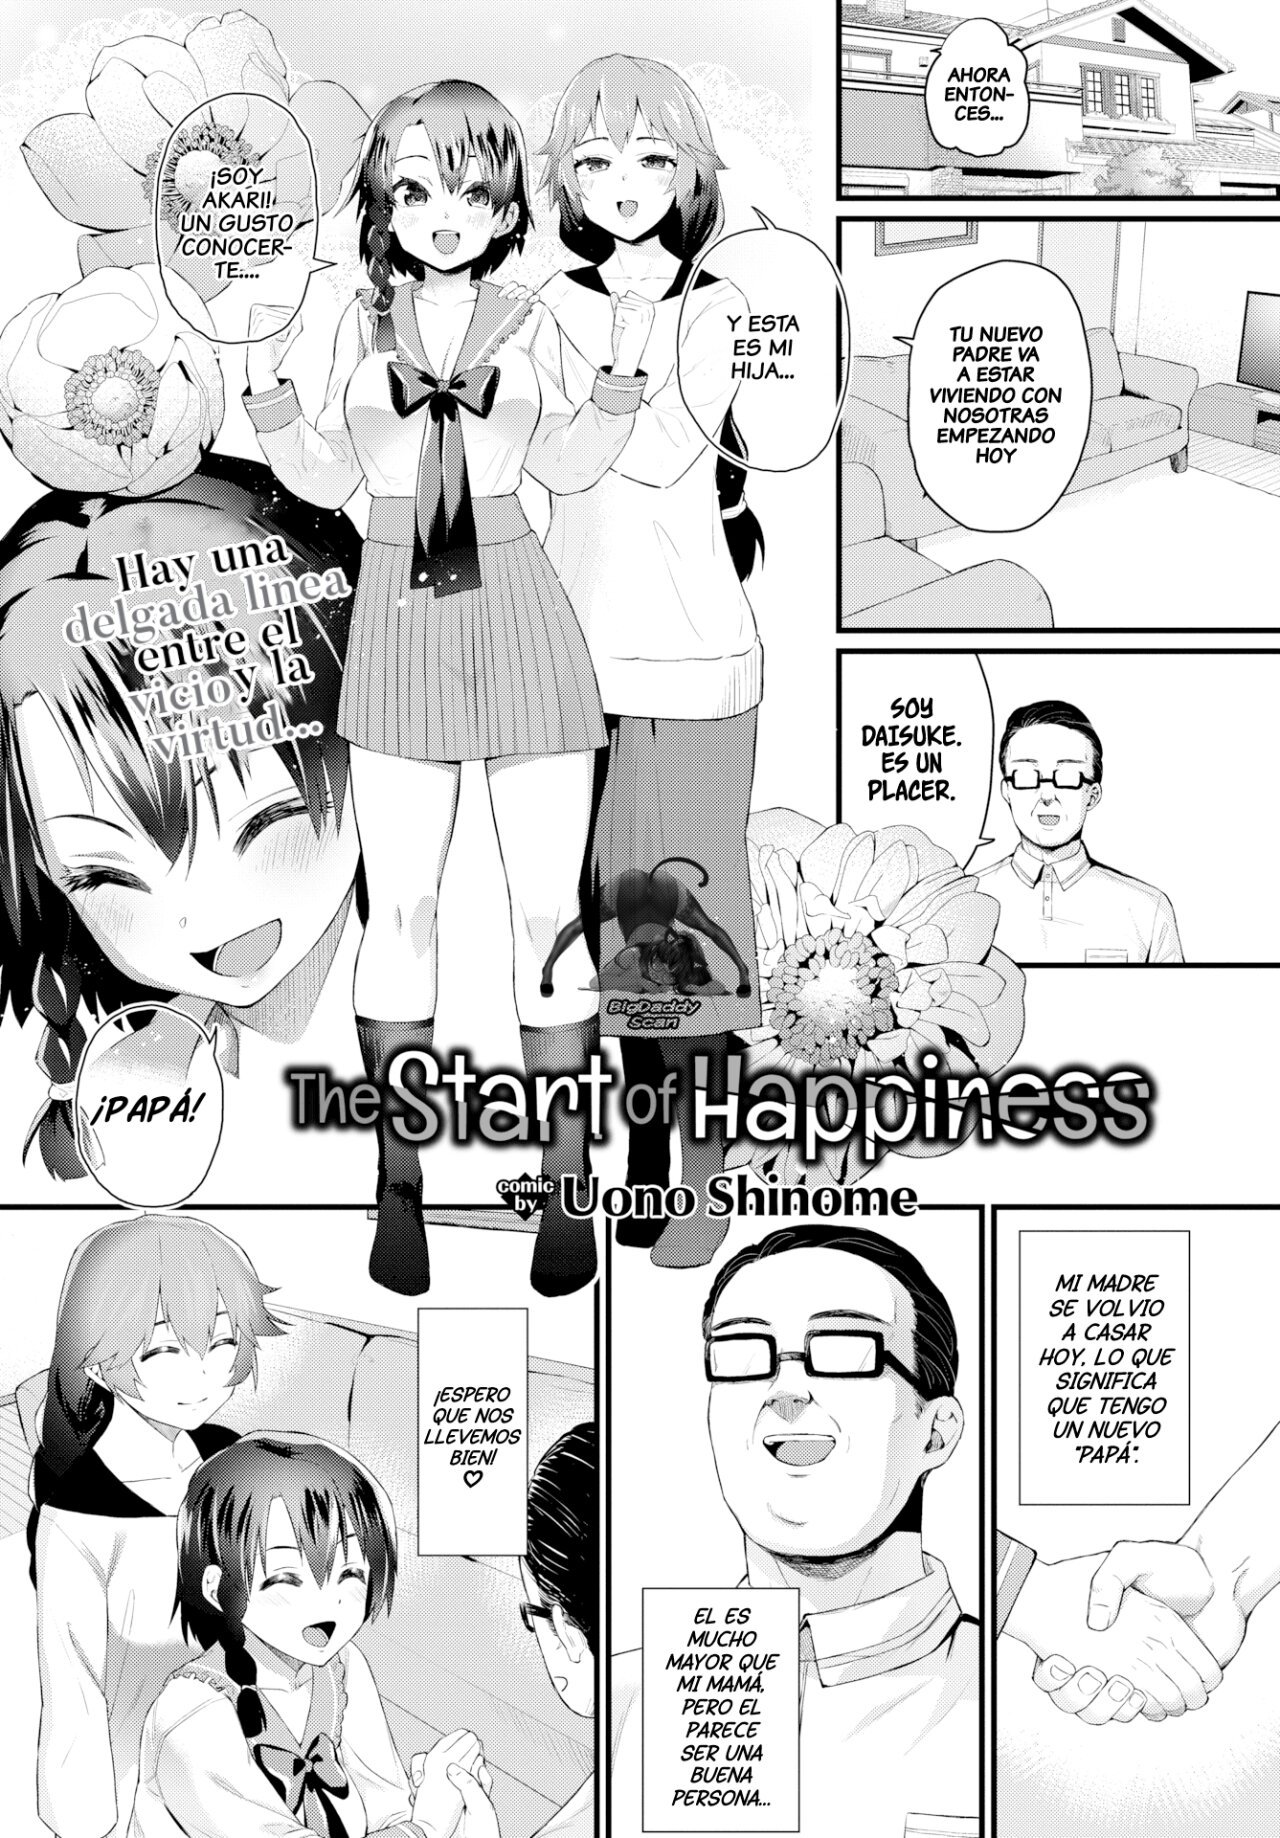 The Start of Happiness - 1